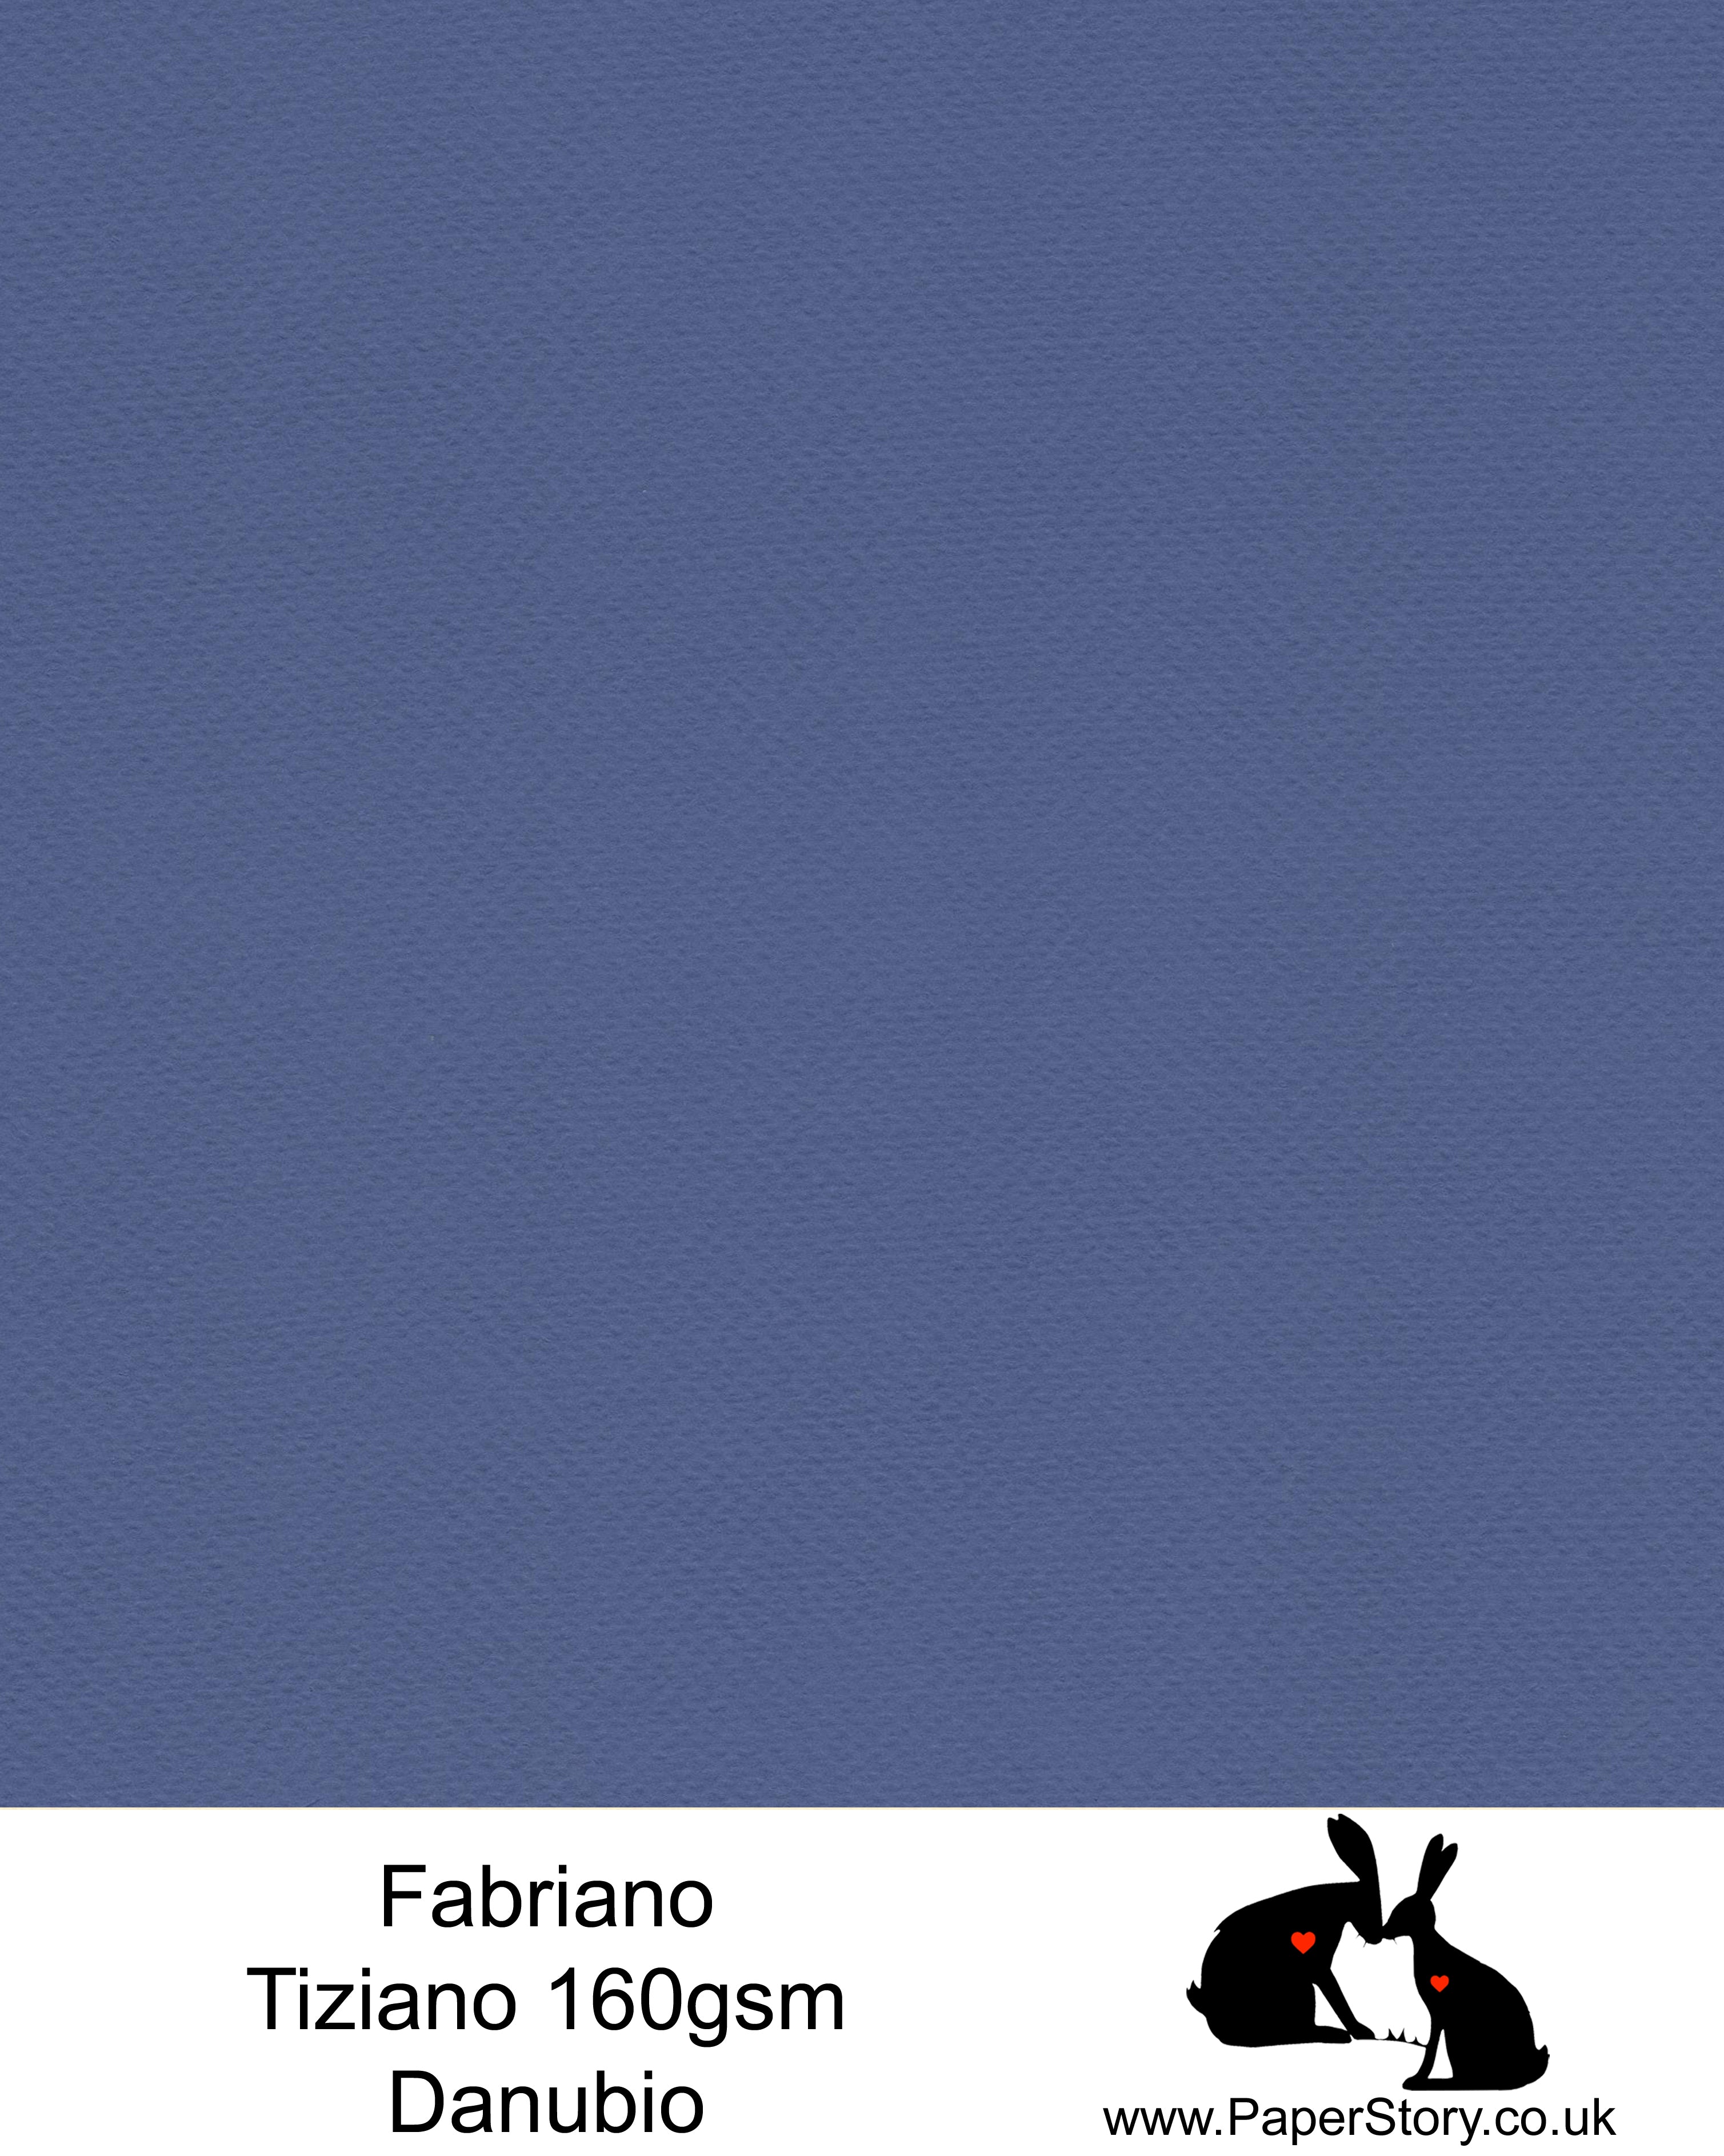 High quality paper from Italy, Danubio deep blue Fabriano Tiziano is 160 gsm, Tiziano has a high cotton content, a textured naturally sized surface. This paper is acid free to guarantee long permanence in time, pH neutral. It has highly lightfast colours, an excellent surface making and sizing which make this paper particularly suitable for papercutting, pastels, pencil, graphite, charcoal, tempera, air brush and watercolour techniques. Tiziano can be used for all printing techniques.